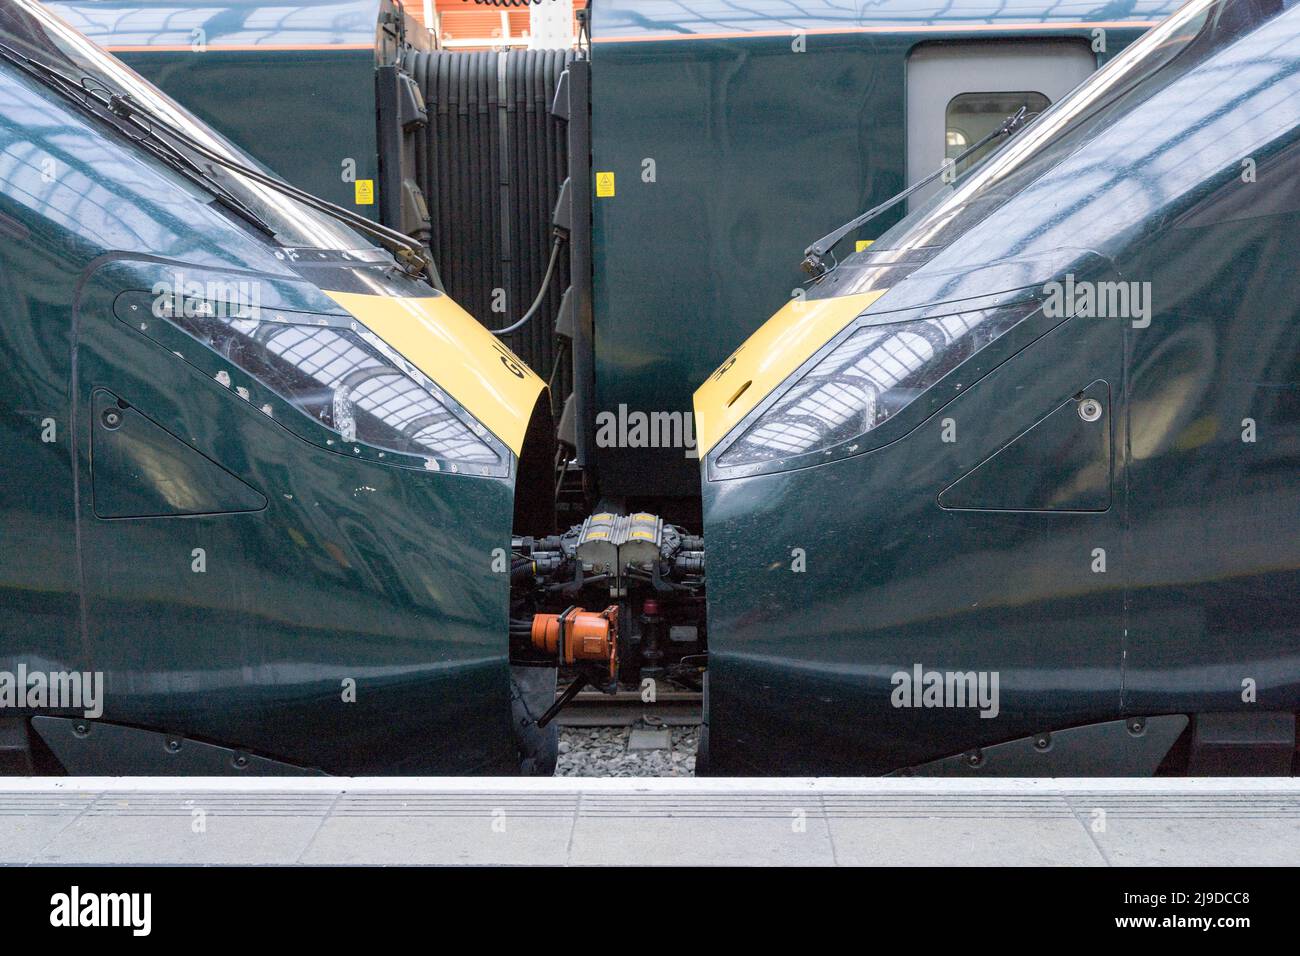 Class 800 coupling of two GWR trains London England UK Stock Photo